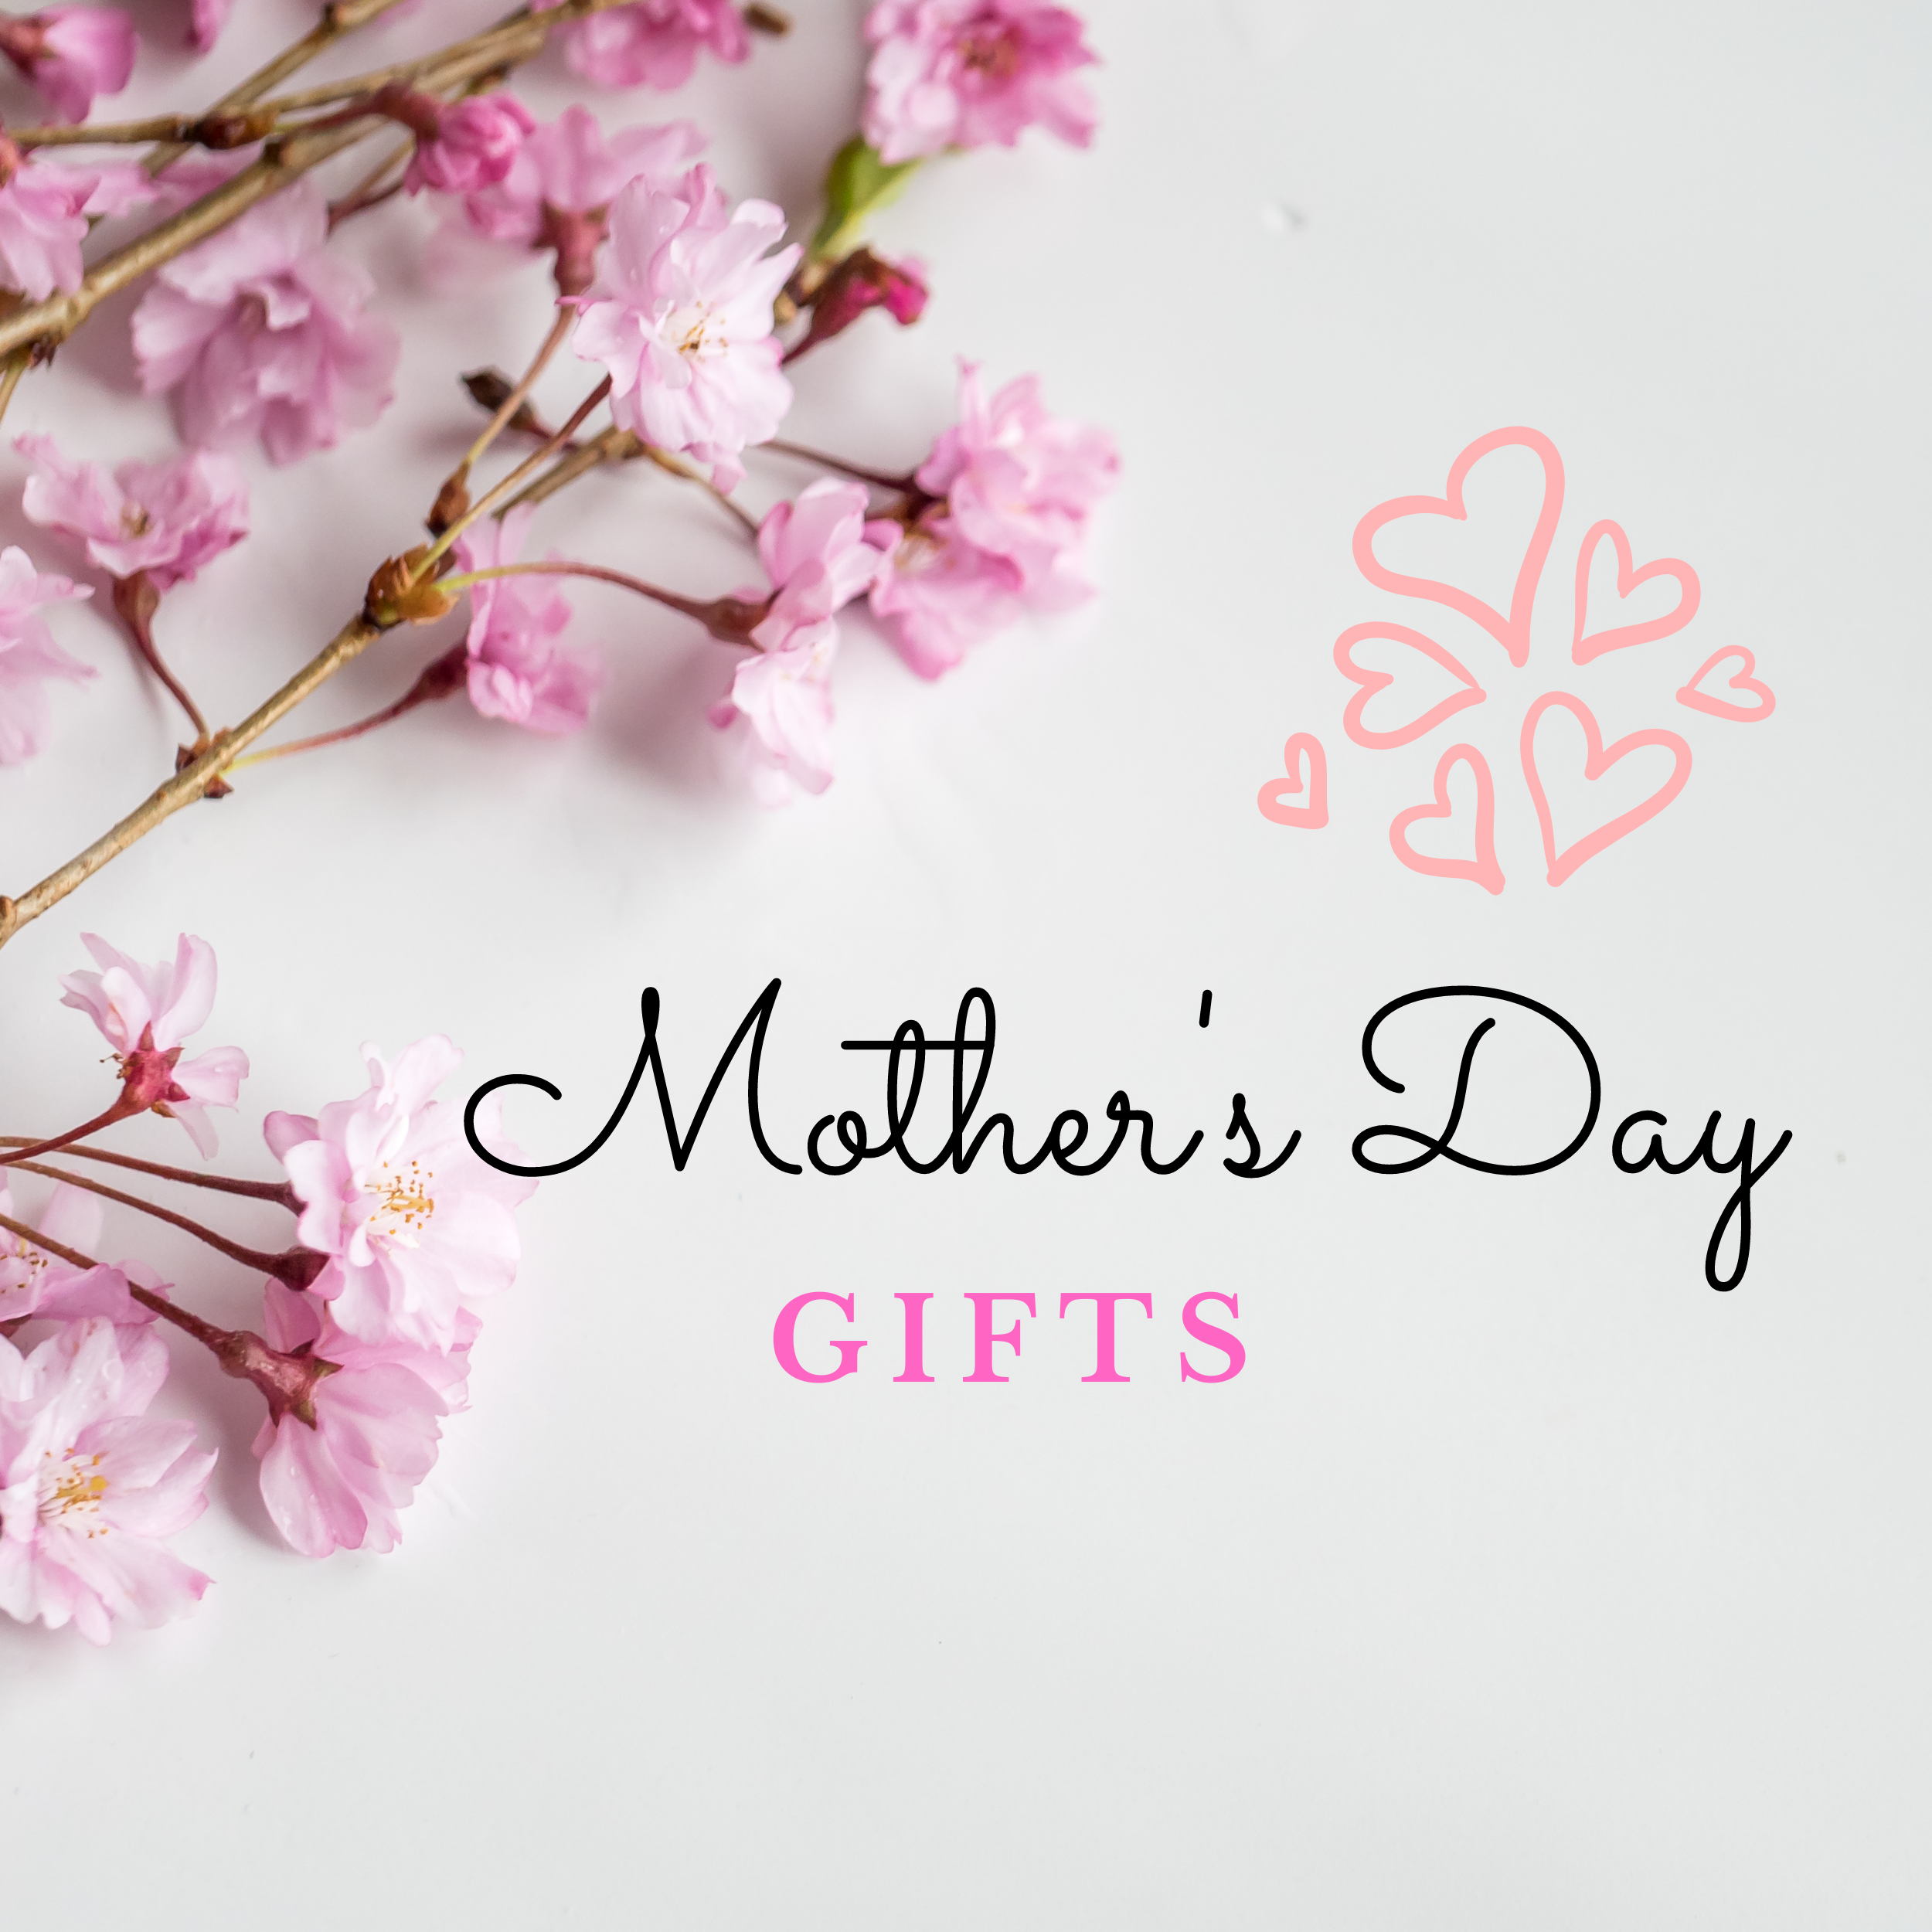 10 Top Gifts For Mother’s Day